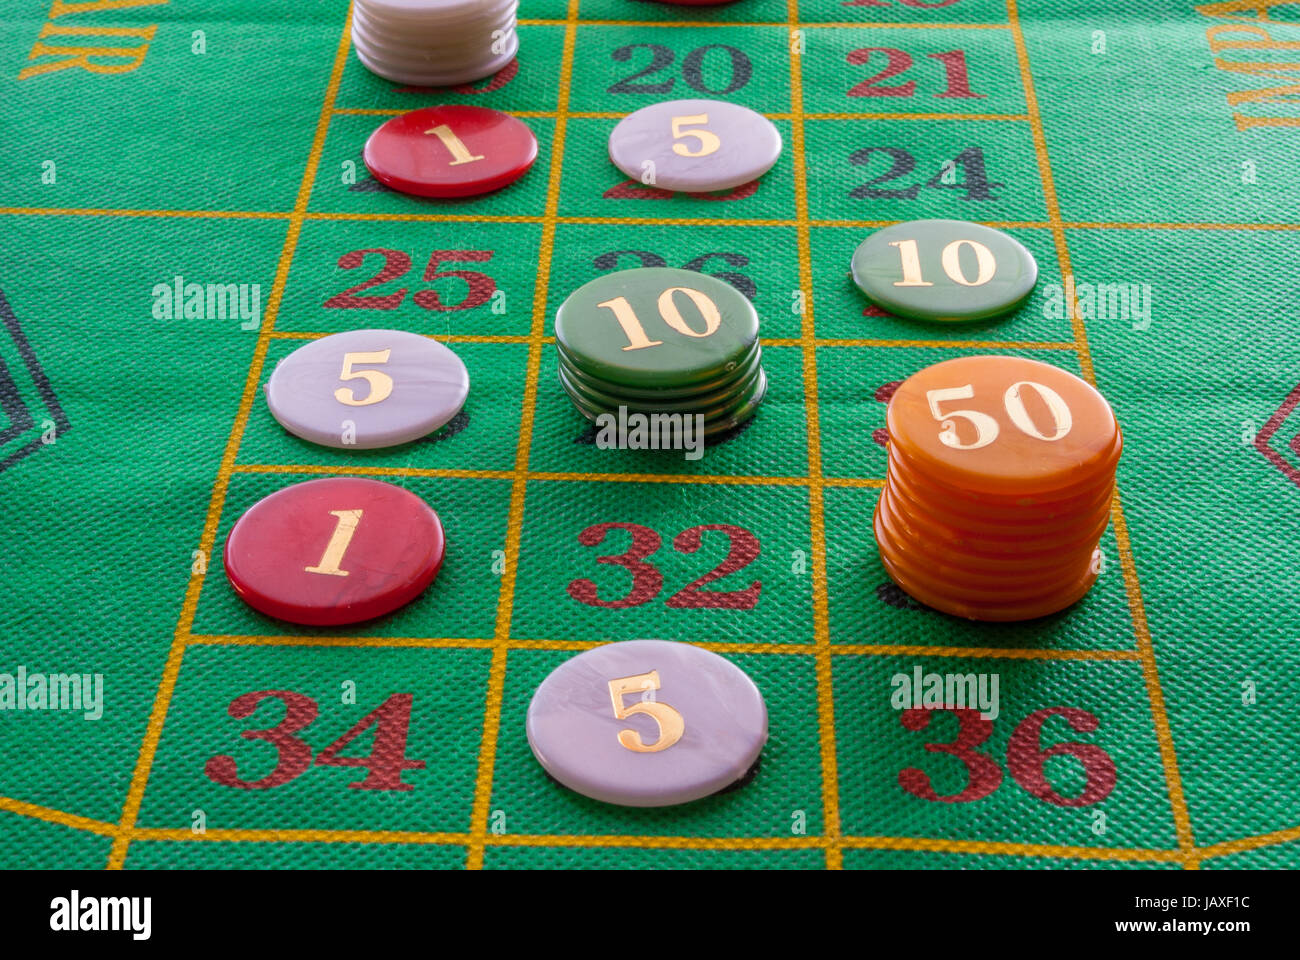 roulette game with game table and green poker chips Stock Photo